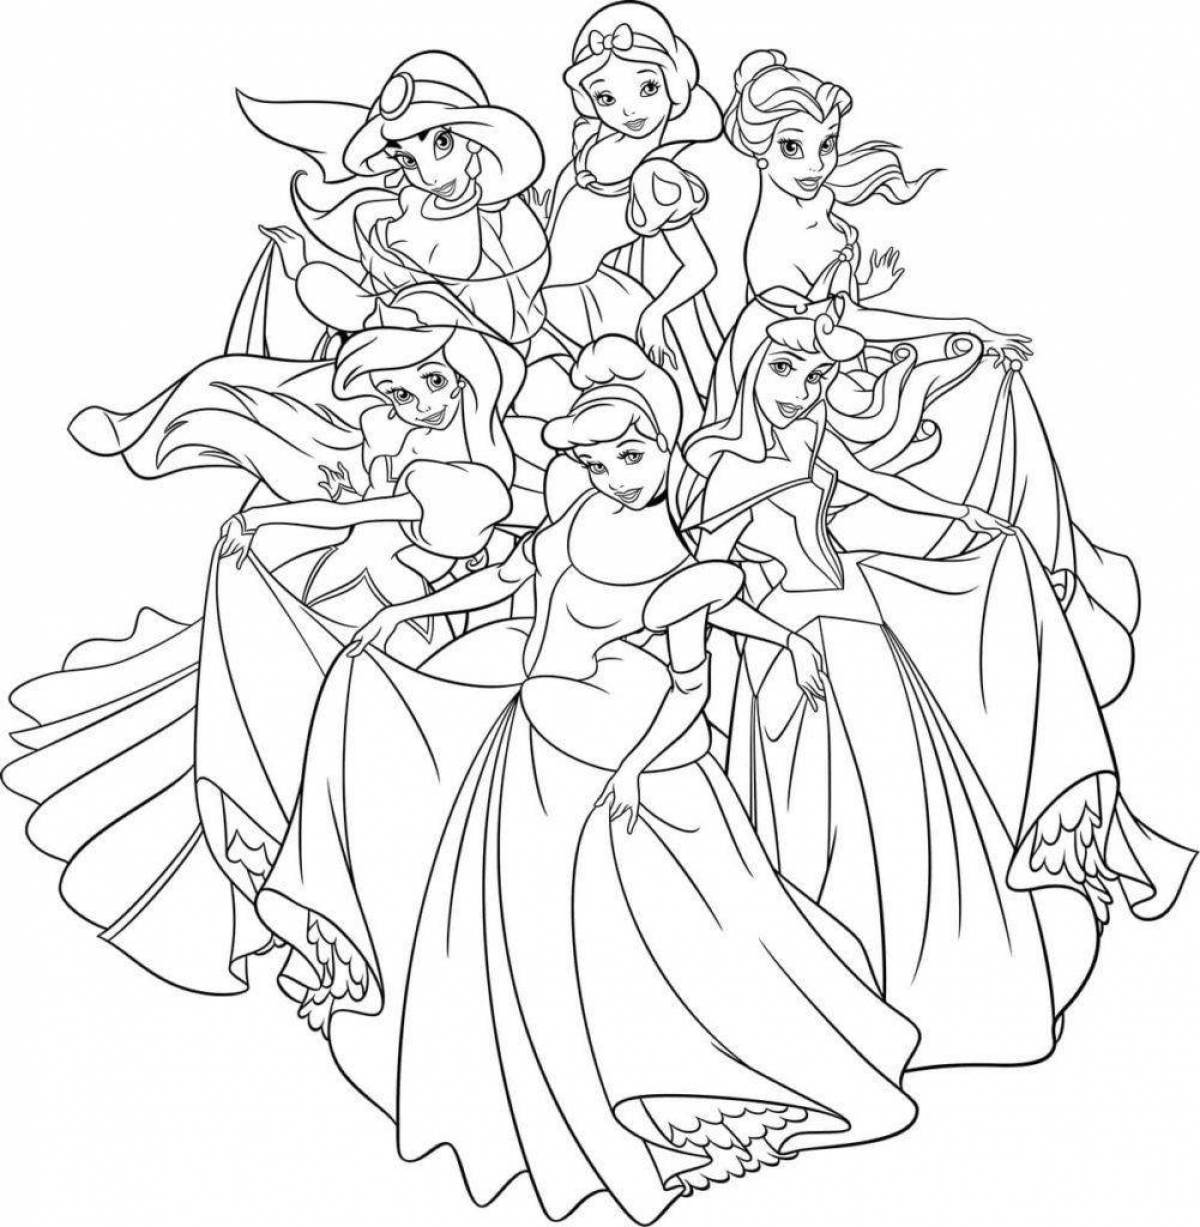 Beautiful coloring book for girls with Disney princesses